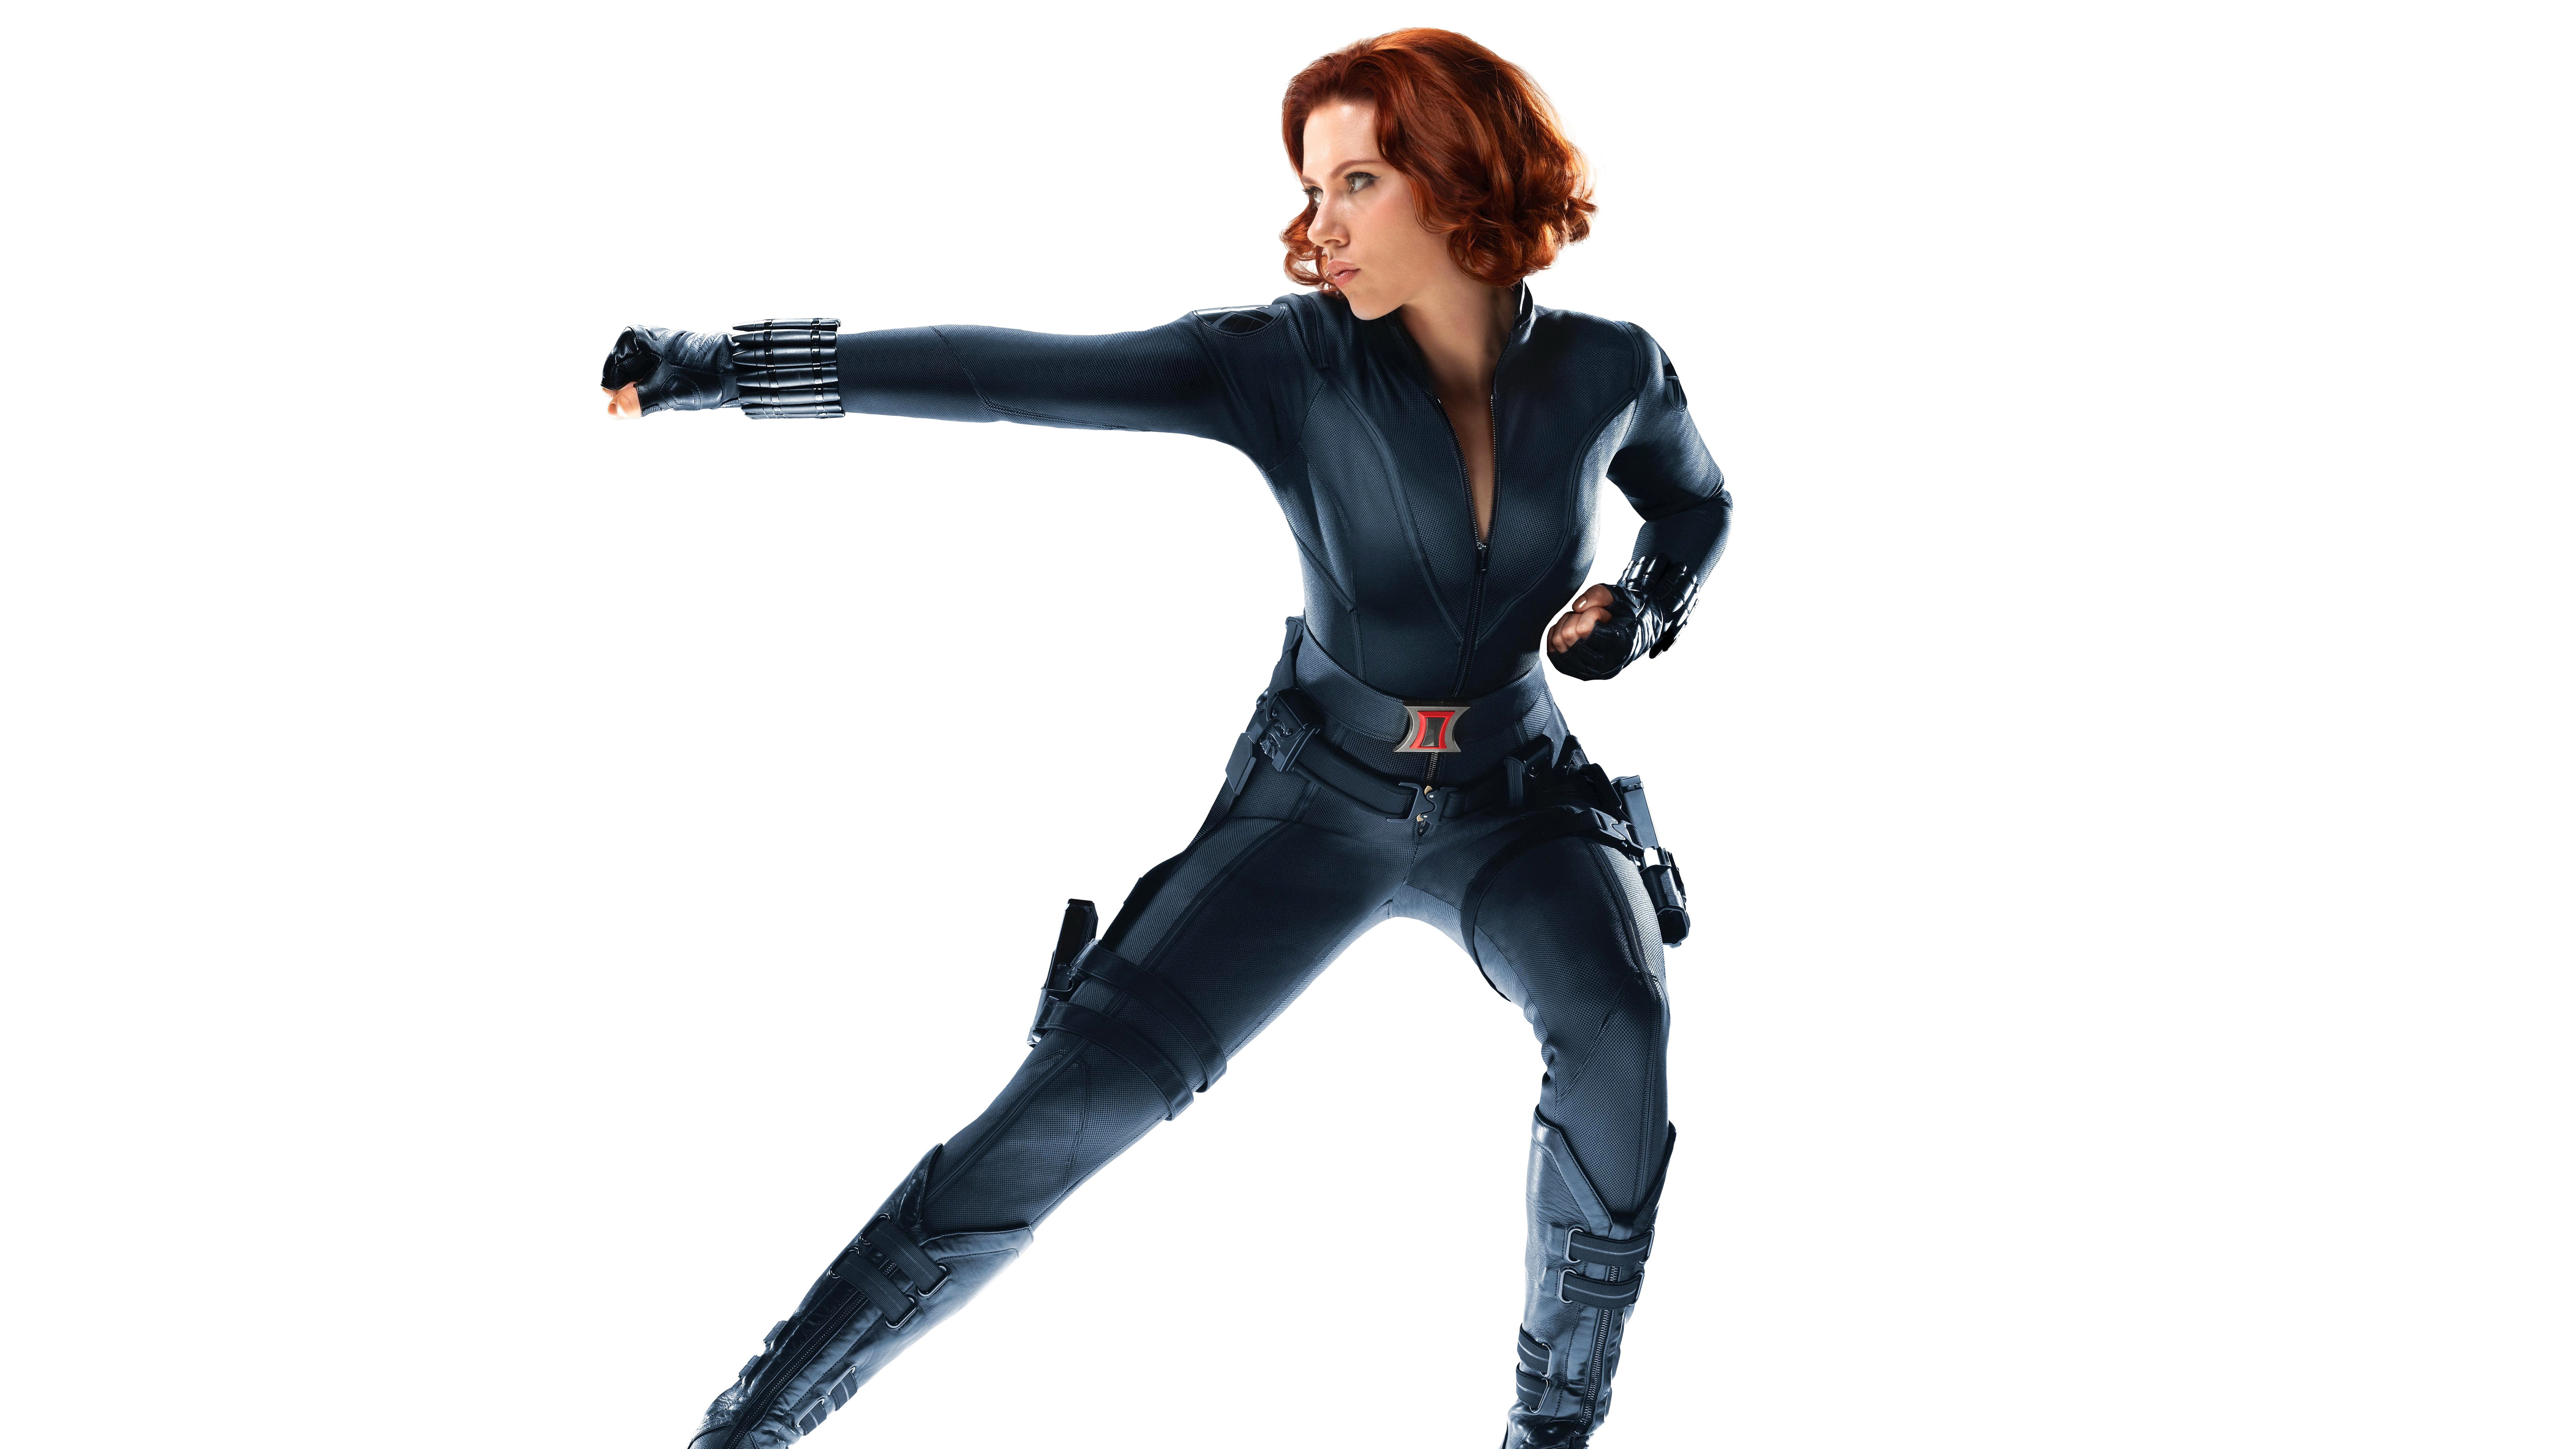 Scarlett Johansson As Black Widow In Avengers HD Wallpapers For Android 3D HD  Wallpapers HD Wallpaper Download For Android Mobile - Download hd wallpapers